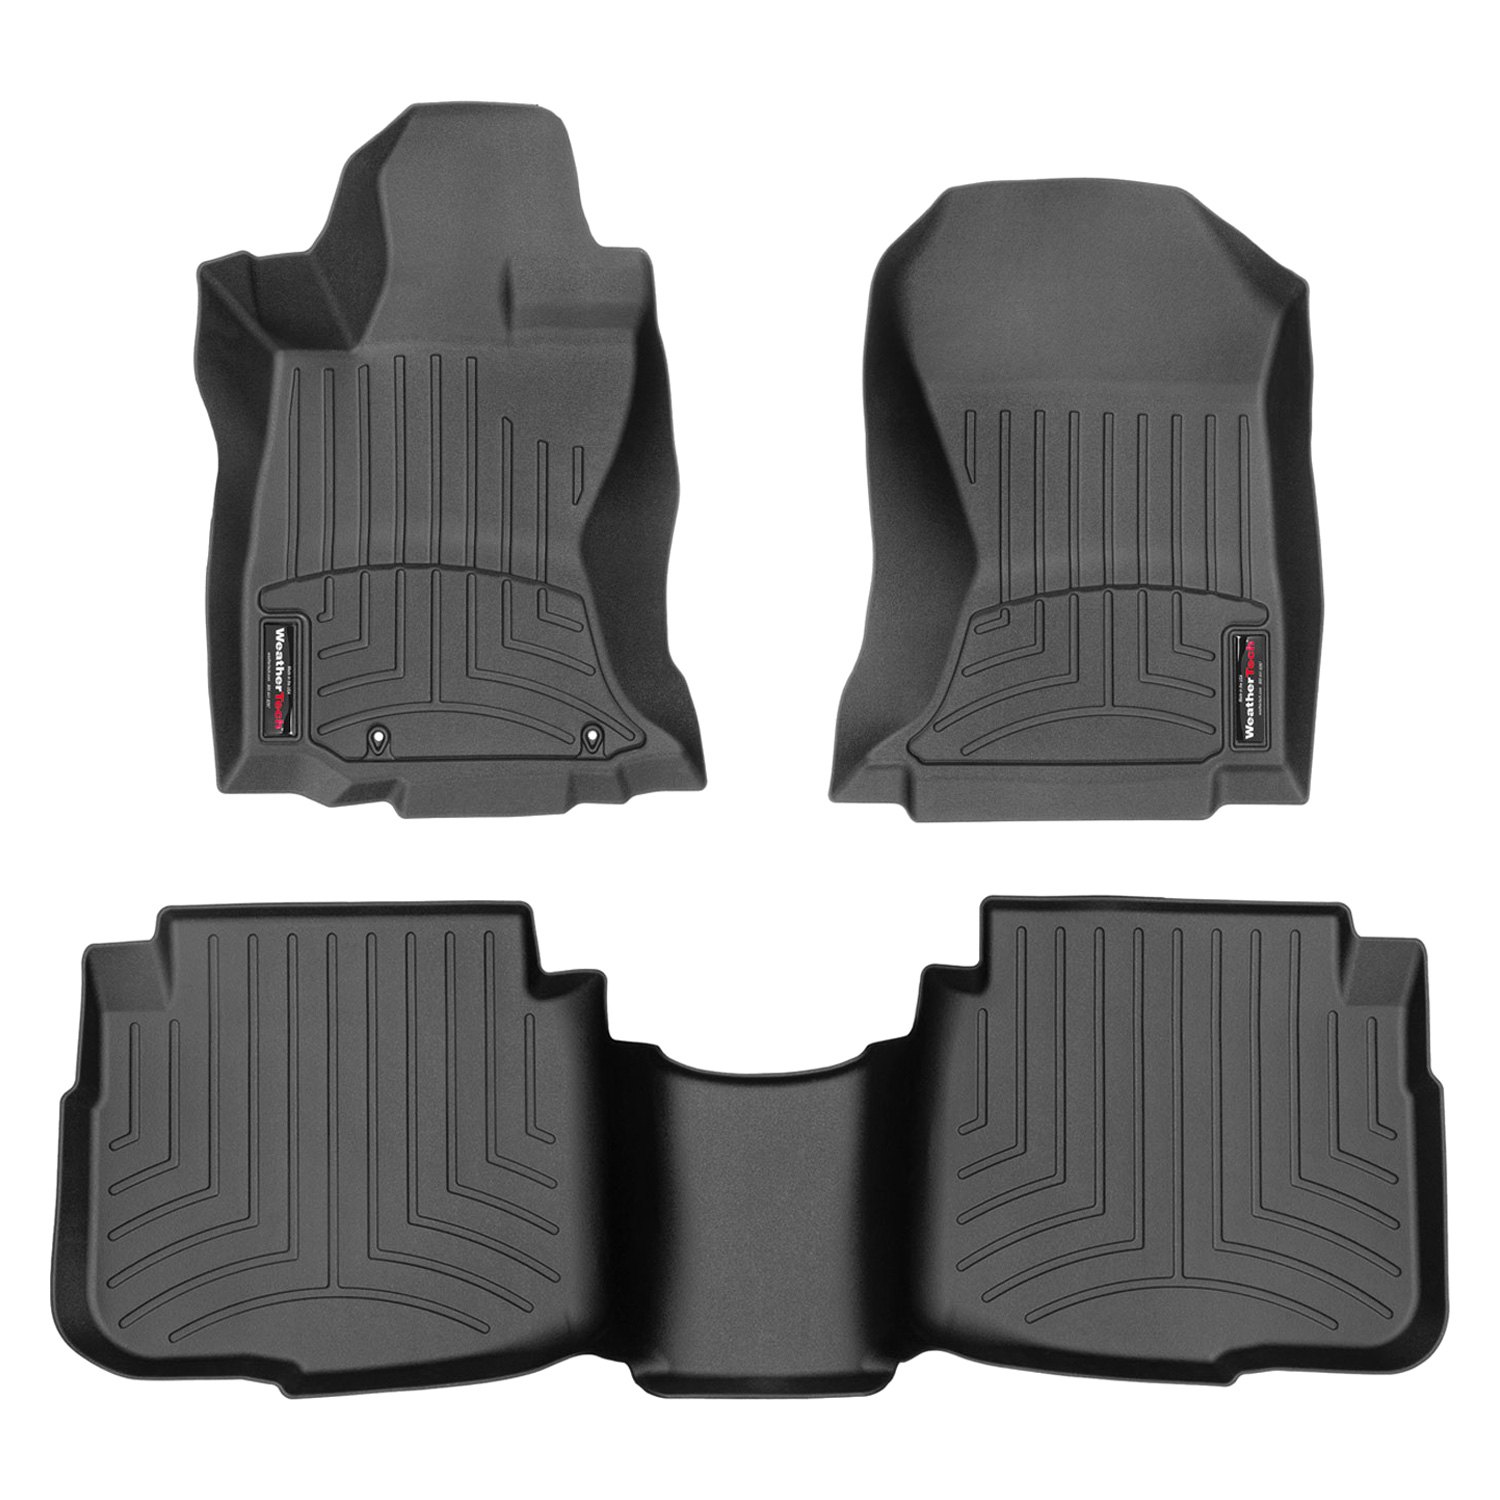 https://images.carid.com/weathertech/products/wf/4415831-4415832.jpg